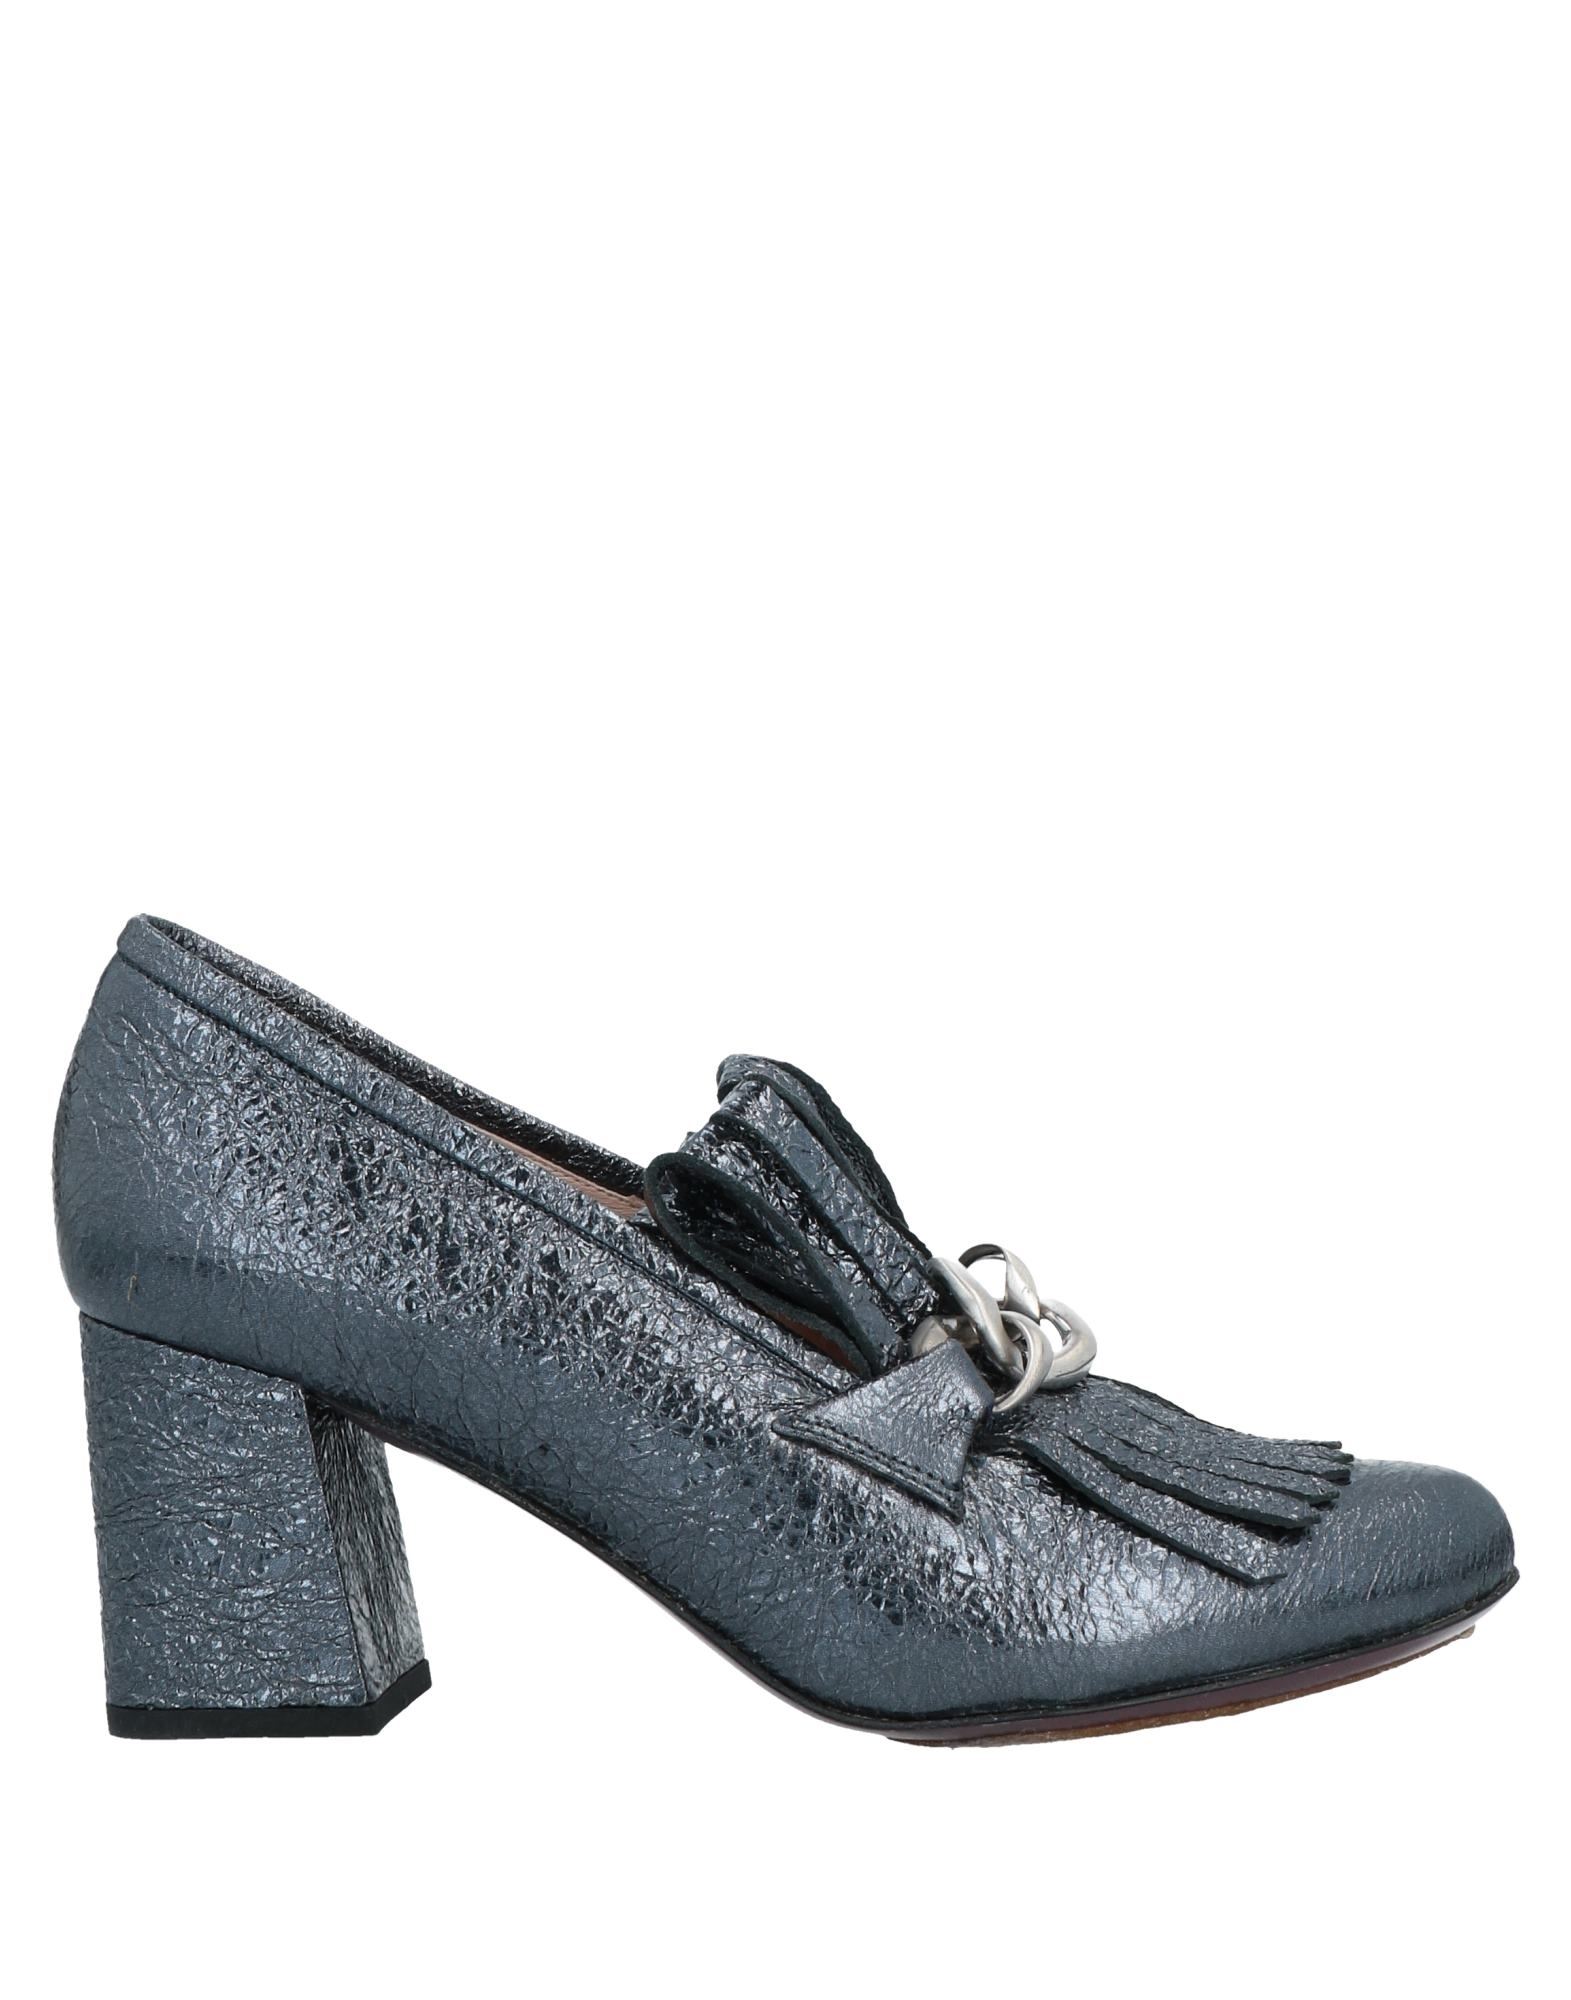 Mina Buenos Aires Loafers In Slate Blue